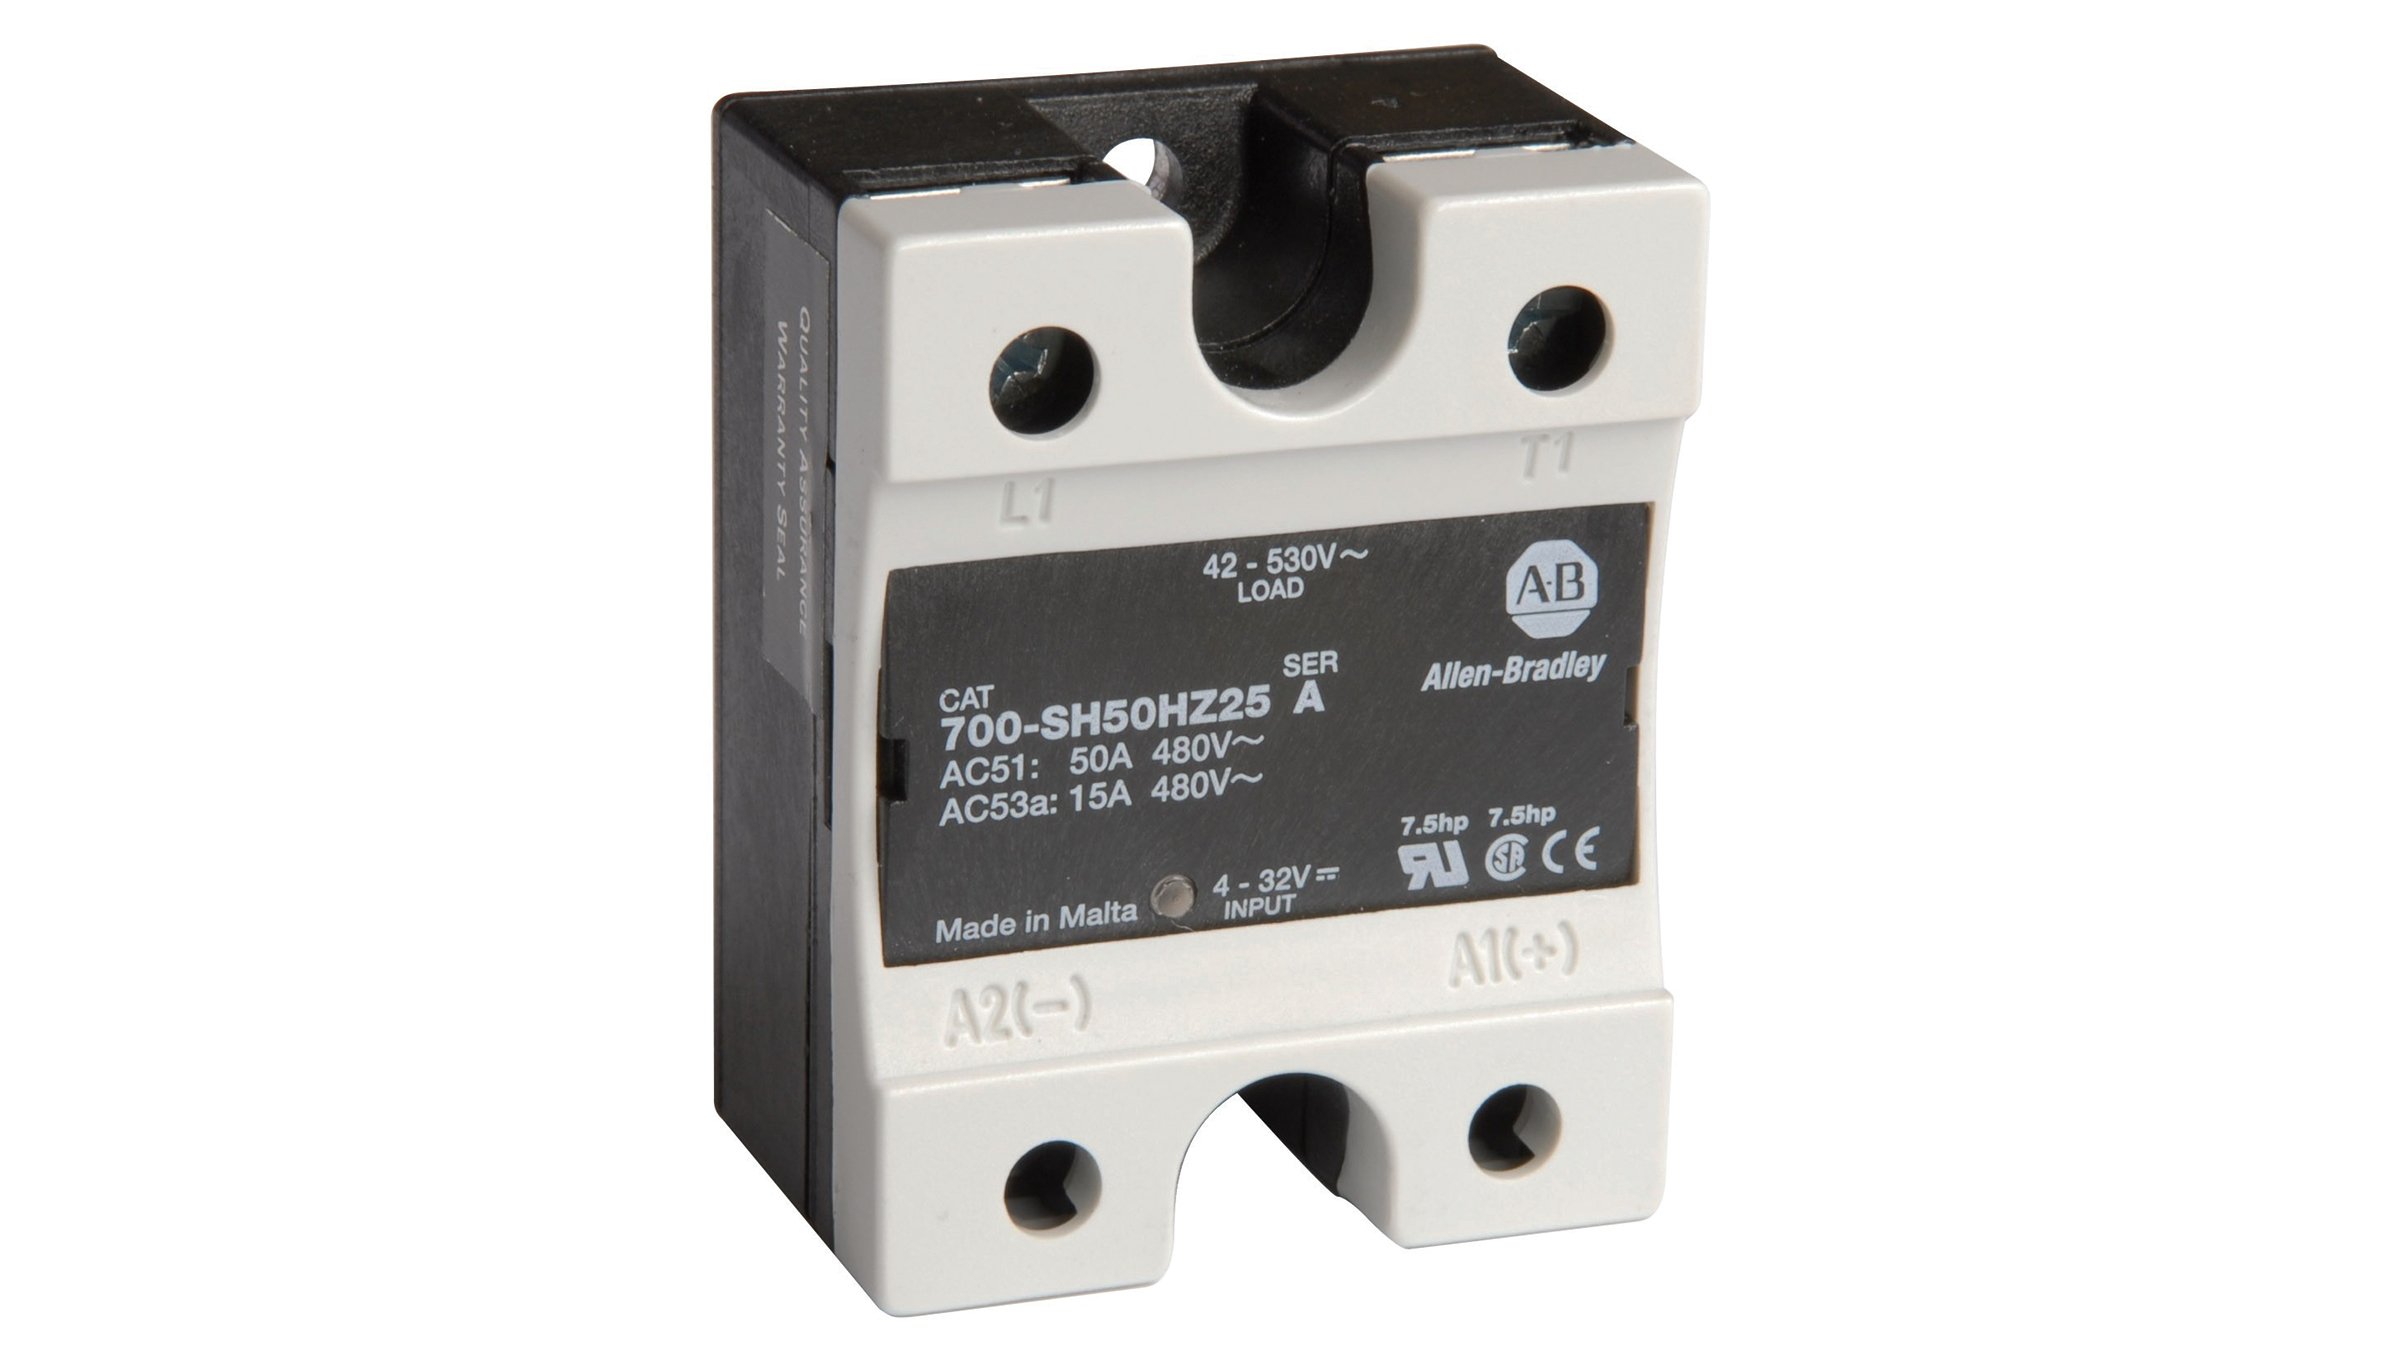 Allen-Bradley Bulletin 700-SH Hockey Puck Solid-state Relays can handle up to a 40 A continuous resistive load